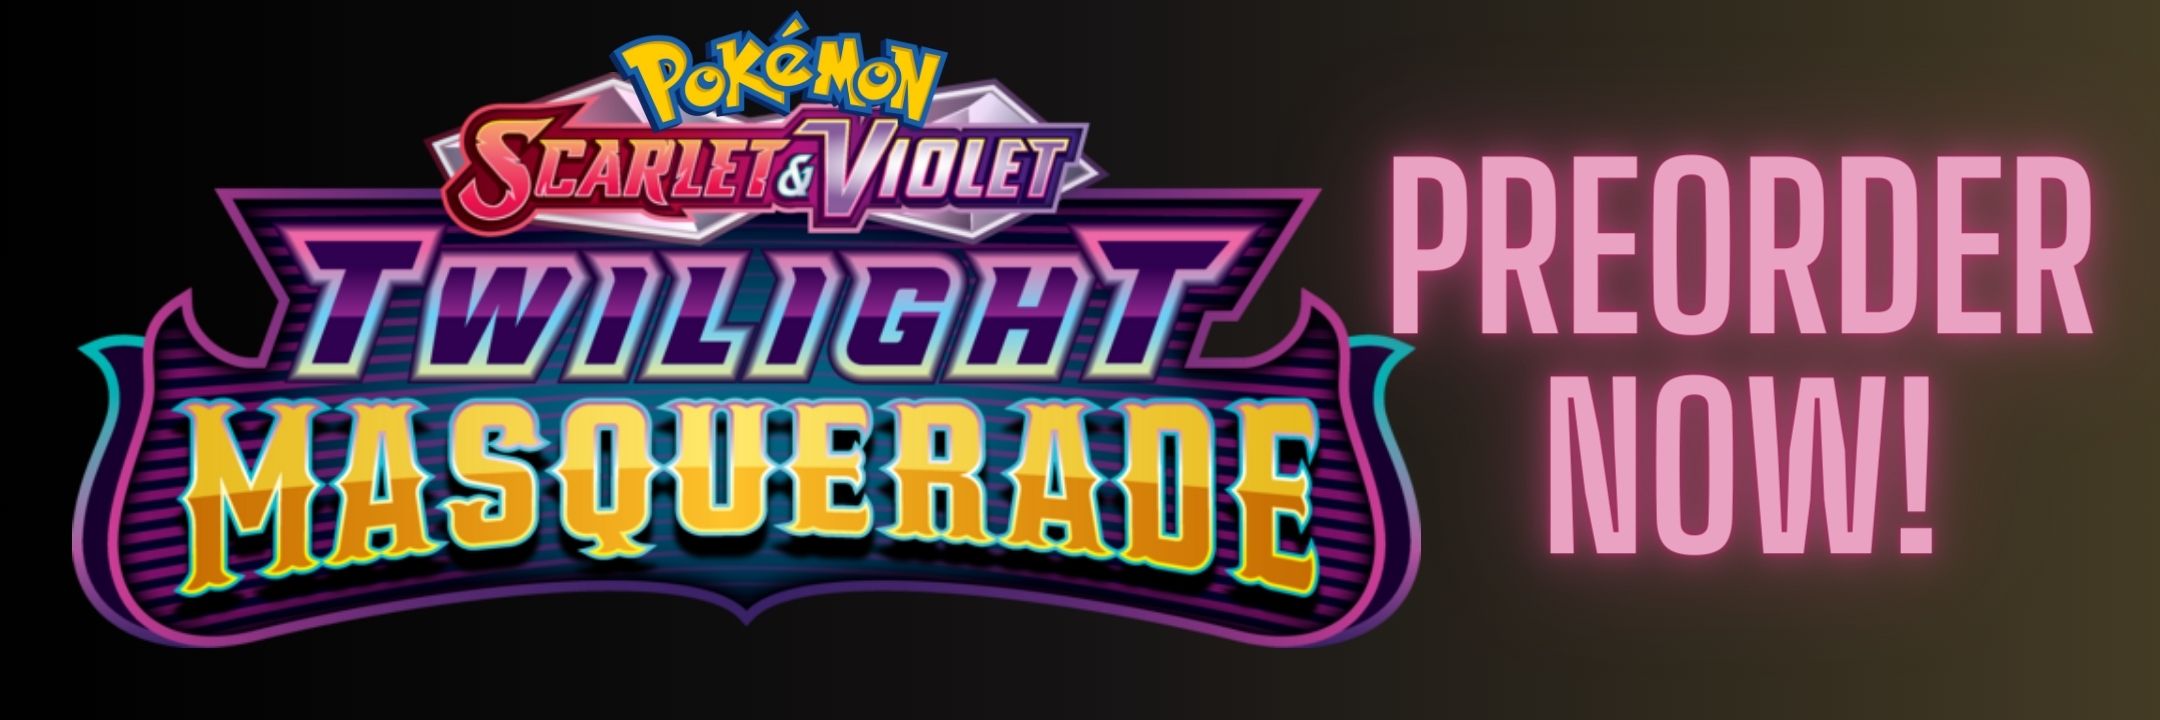 Pokemon Trading Card Game Scarlet and Violet Twilight Masquerade